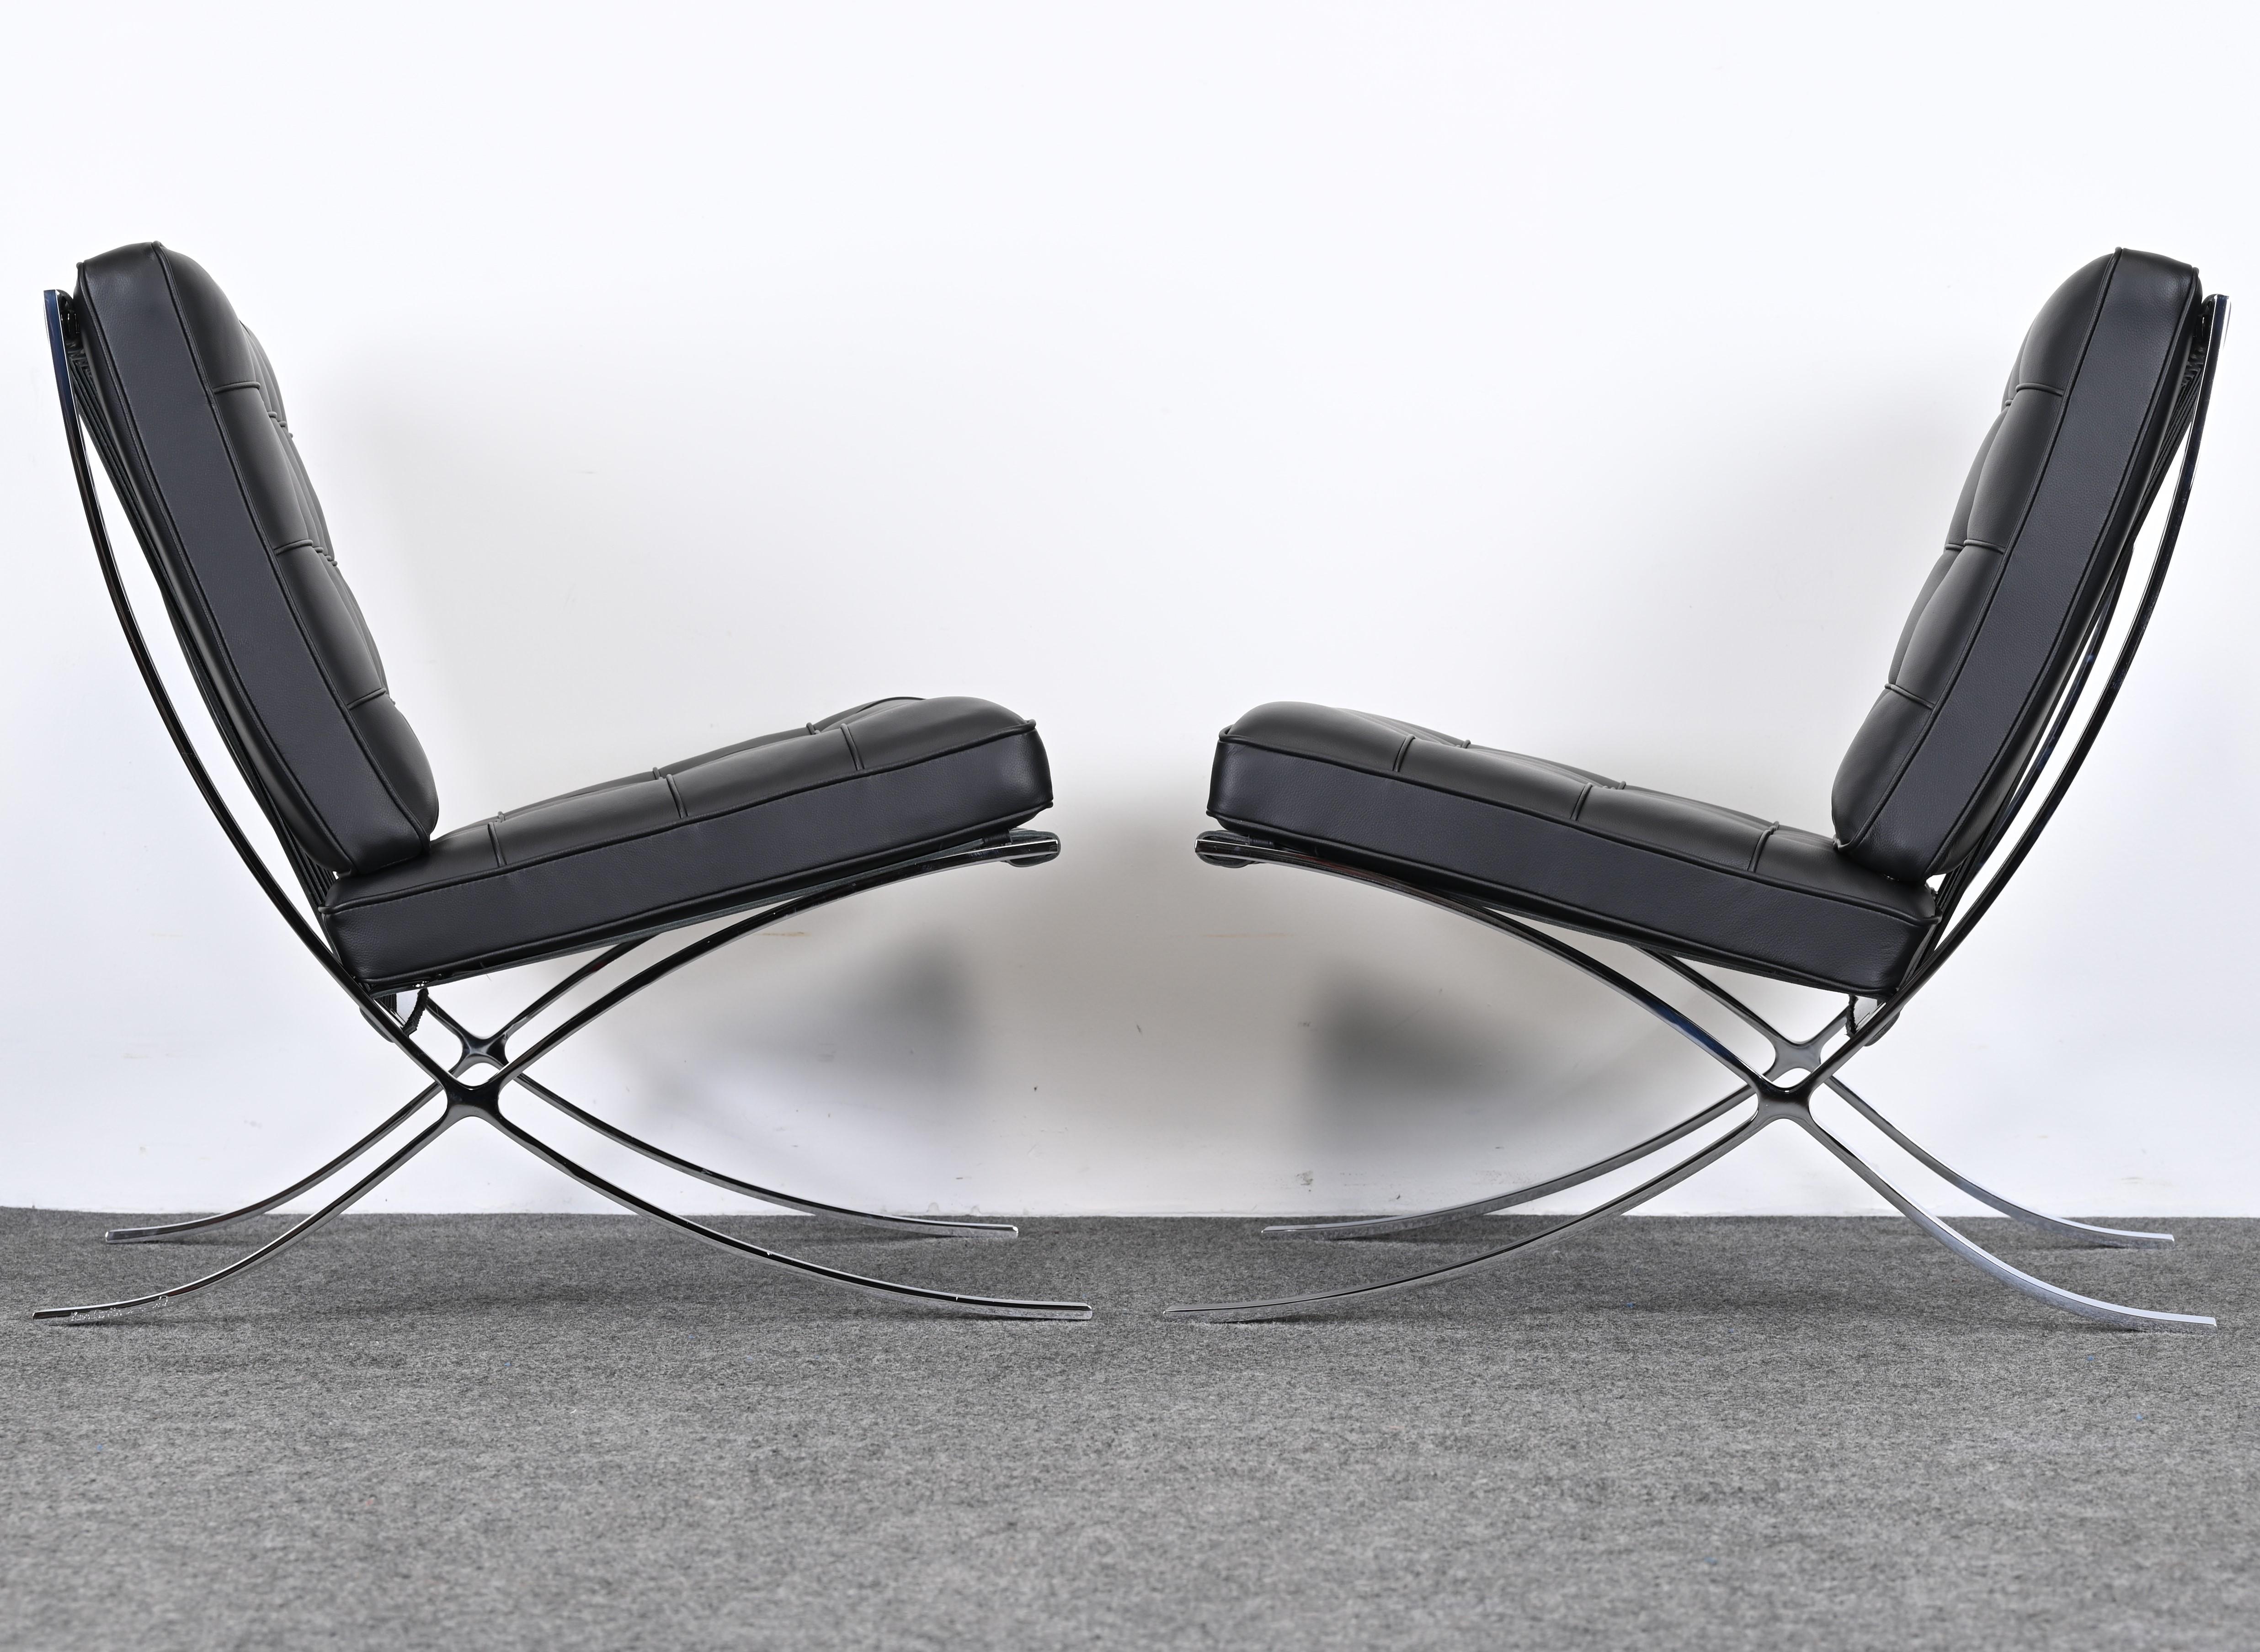 Mid-Century Modern Pair of Ludwig Mies van der Rohe Barcelona Chairs for Knoll Studio